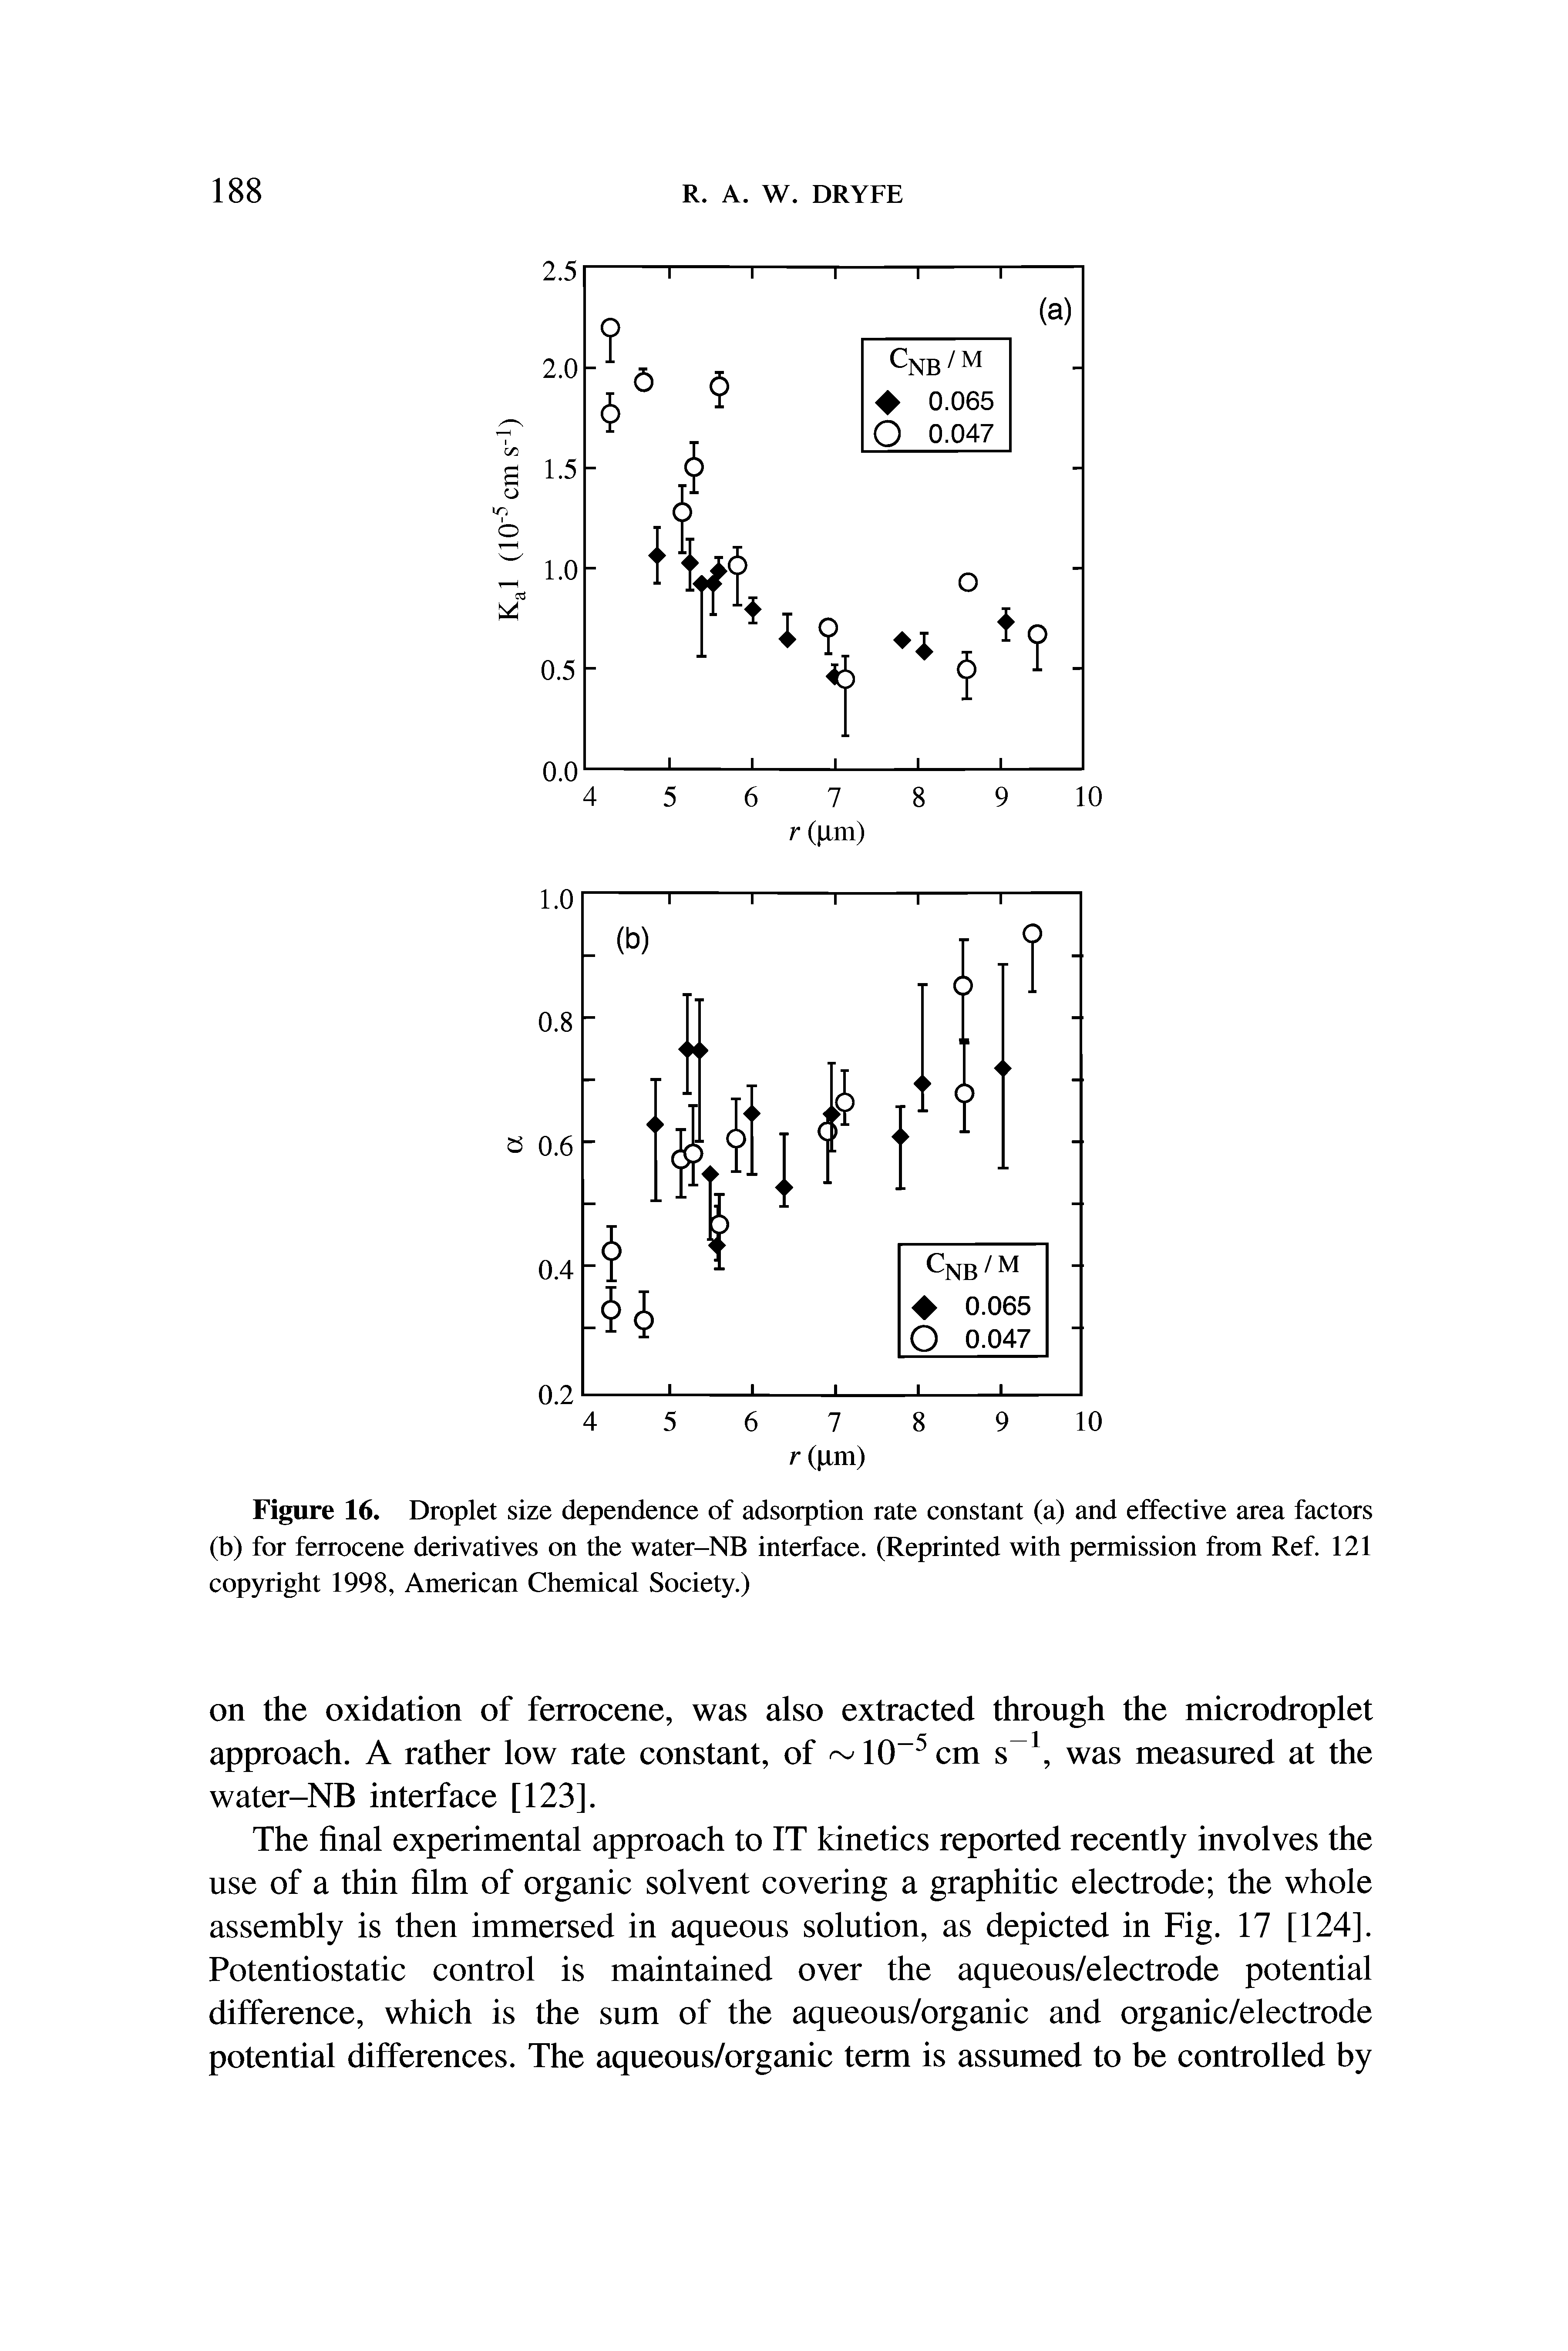 Figure 16. Droplet size dependence of adsorption rate constant (a) and effective area factors (b) for ferrocene derivatives on the water-NB interface. (Reprinted with permission from Ref. 121 copyright 1998, American Chemical Society.)...